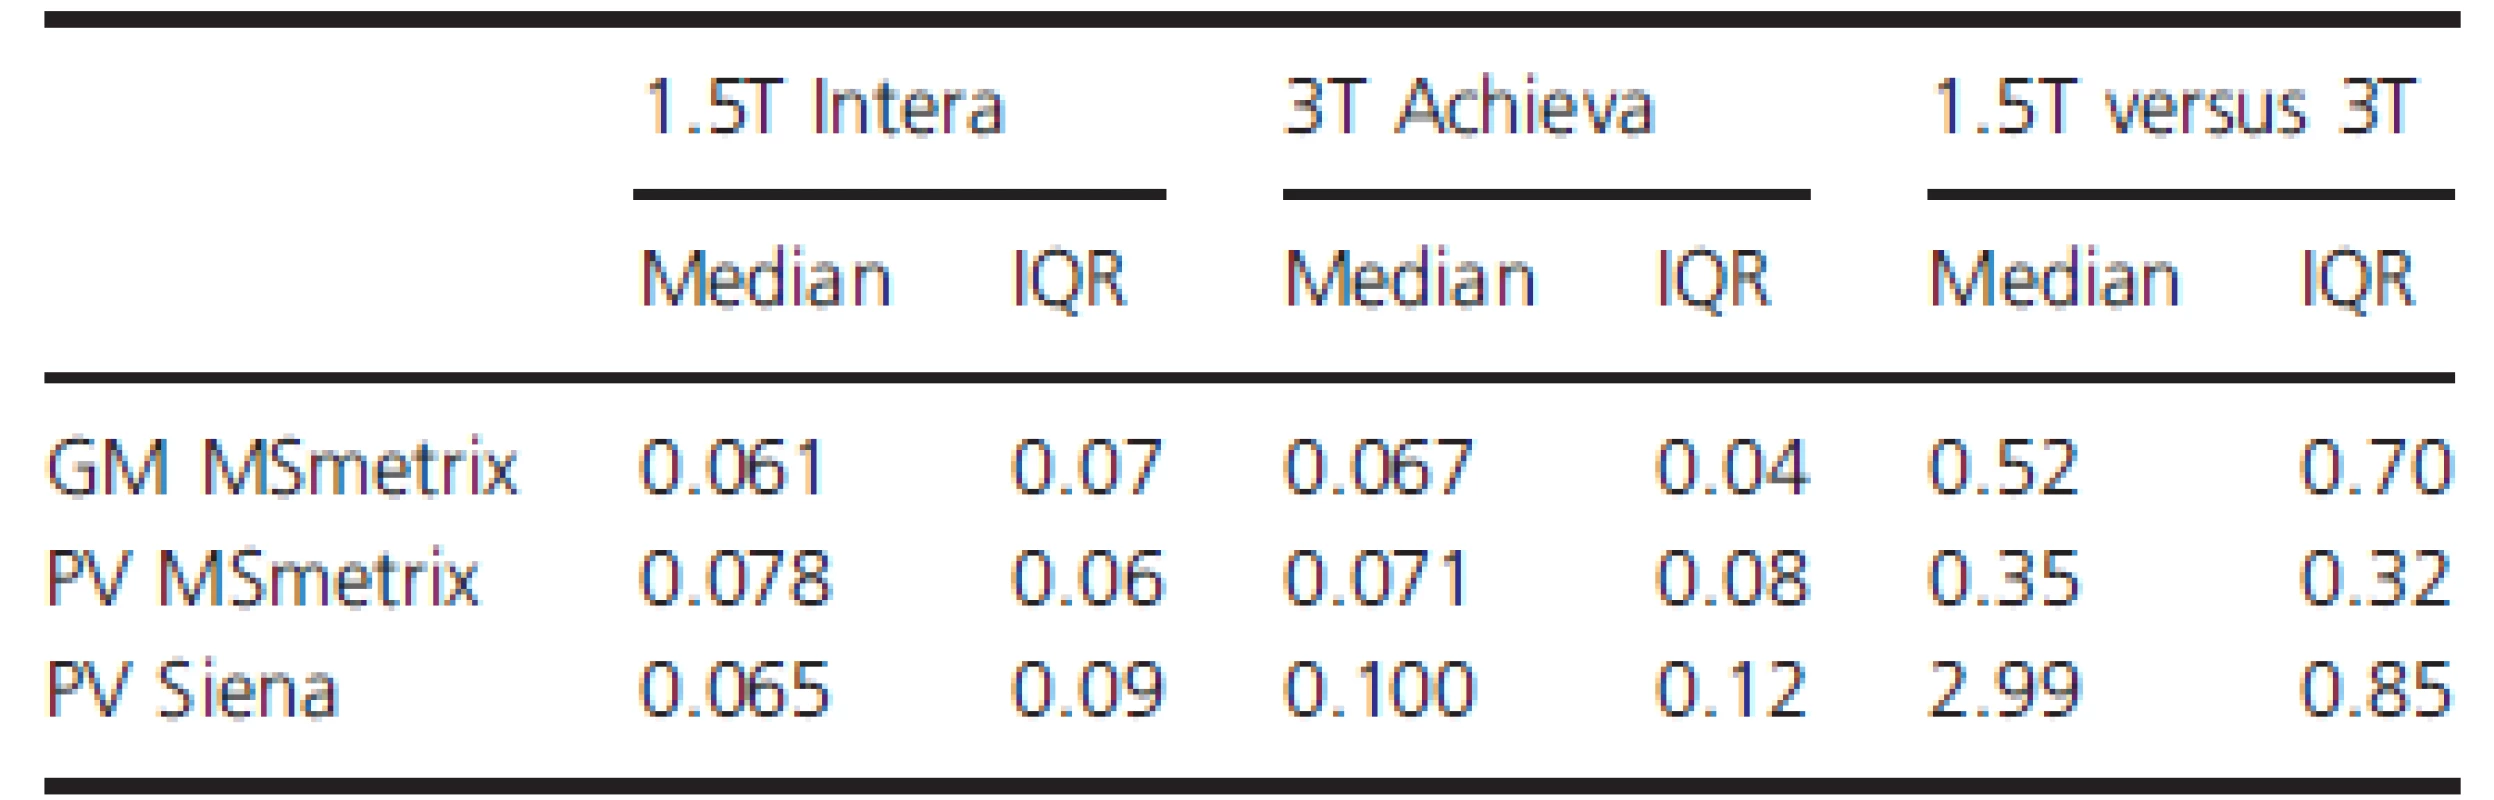 Median and interquartile range (IQR) of the intra and interscanner test–retest measurement errors for PV and GM (in %).